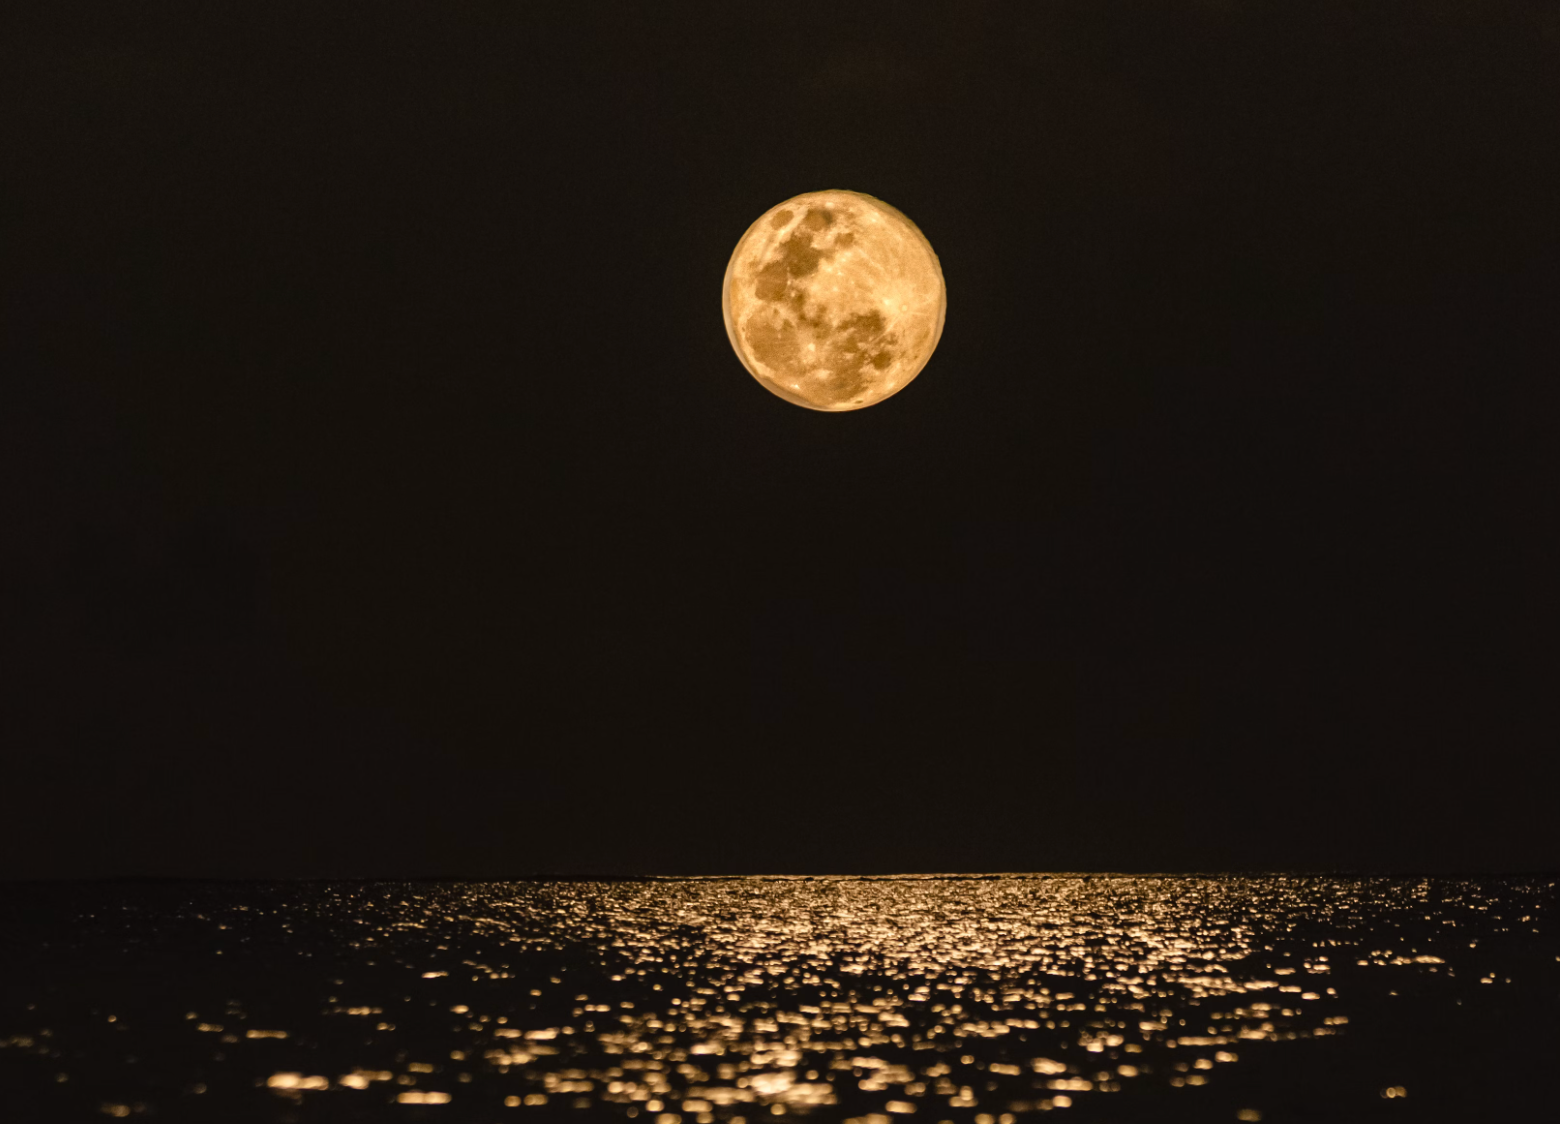 Stunning photo of the moon over pond water